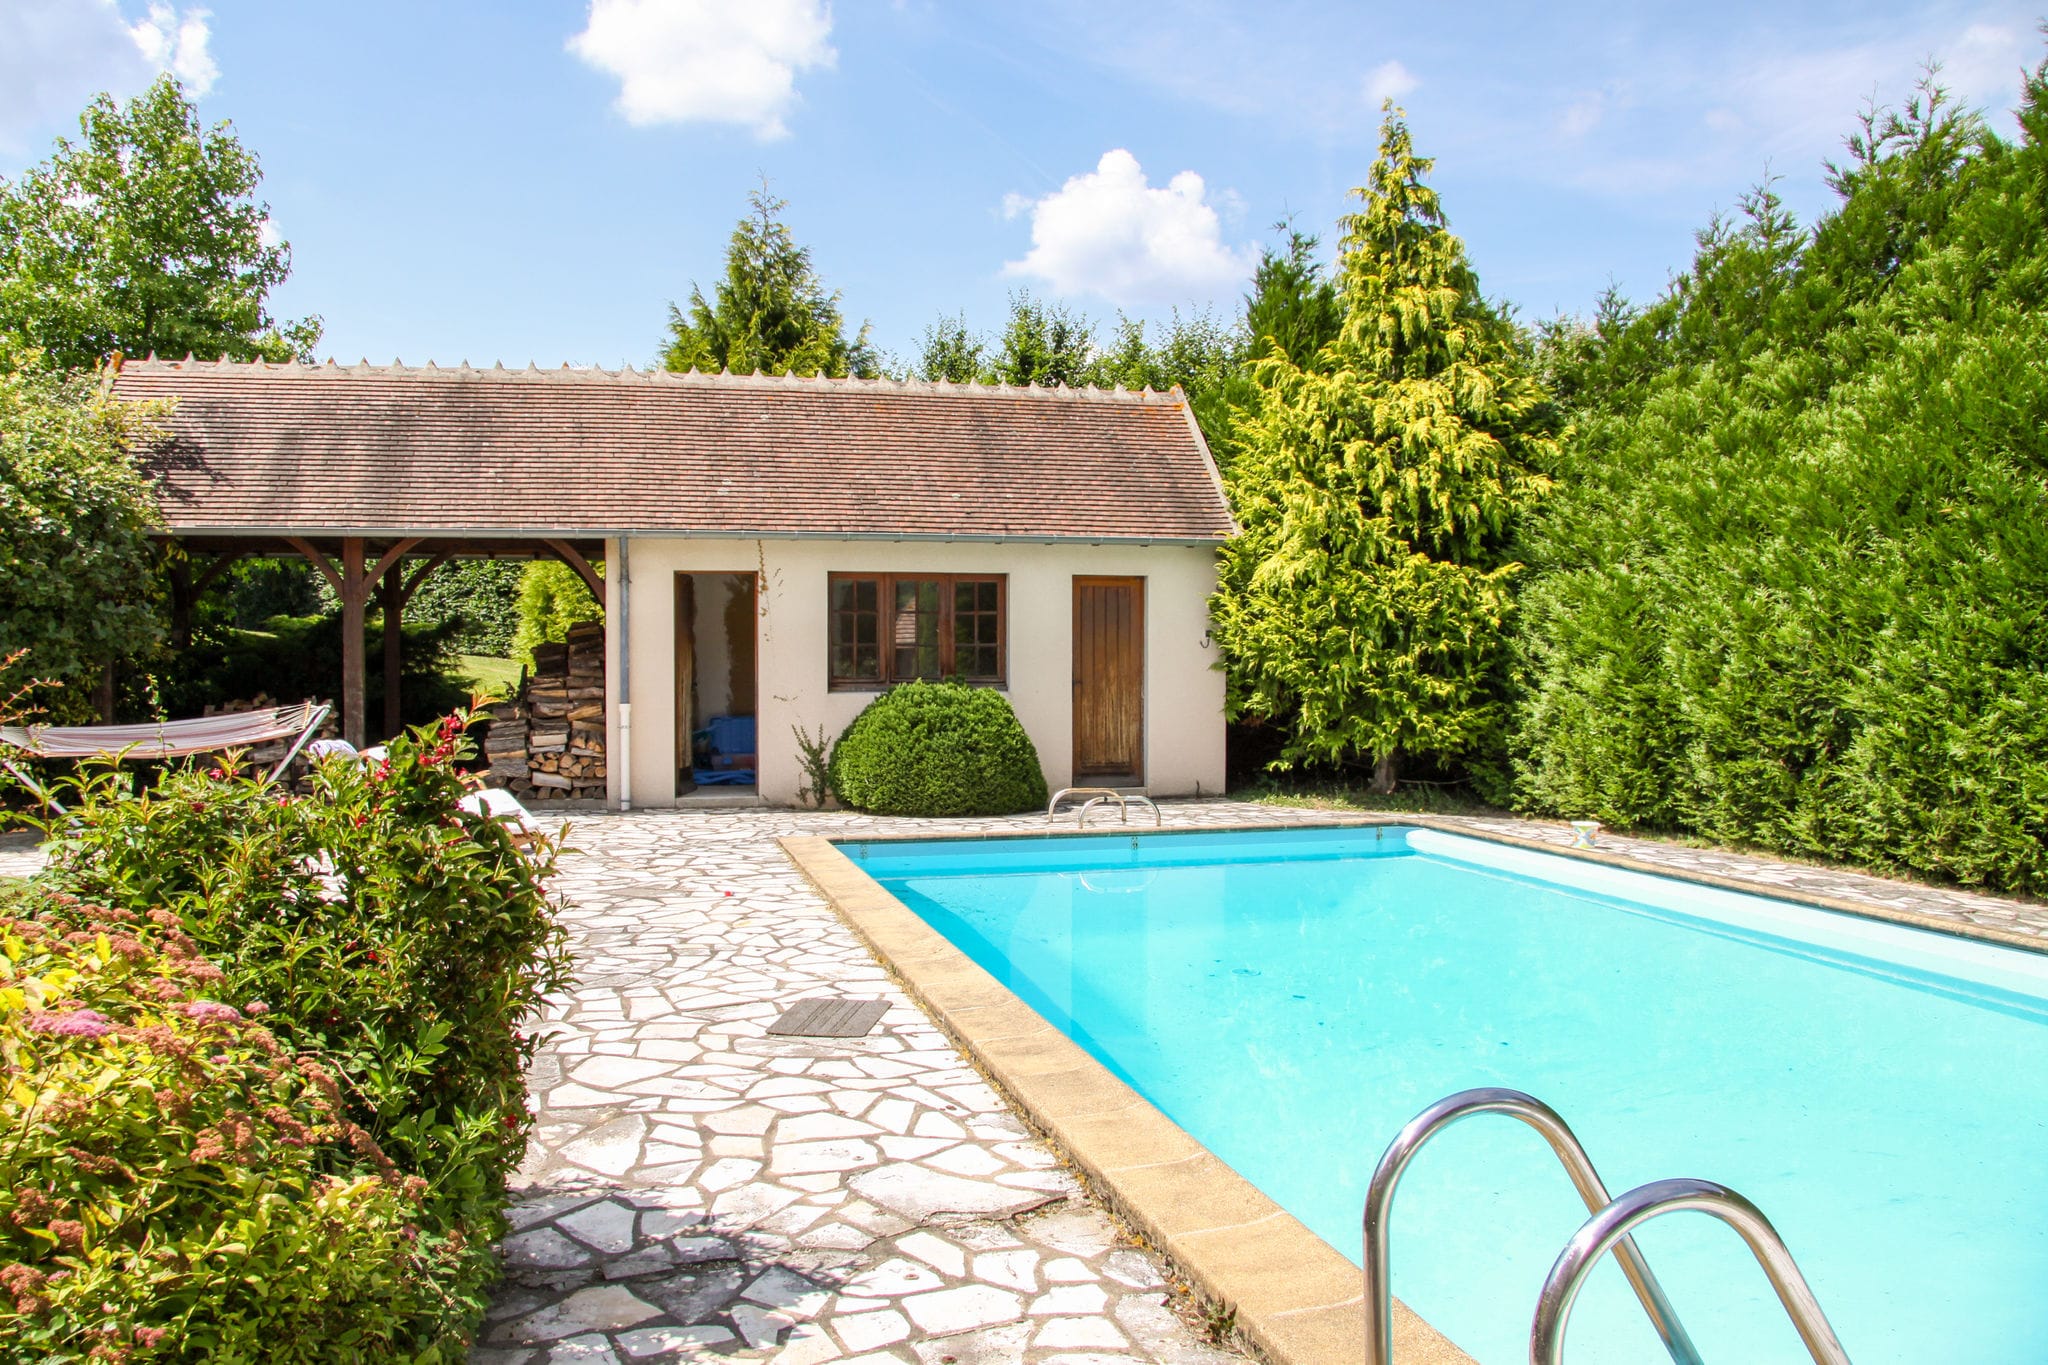 Delightful holiday home with a large private swimming pool, perfect for families